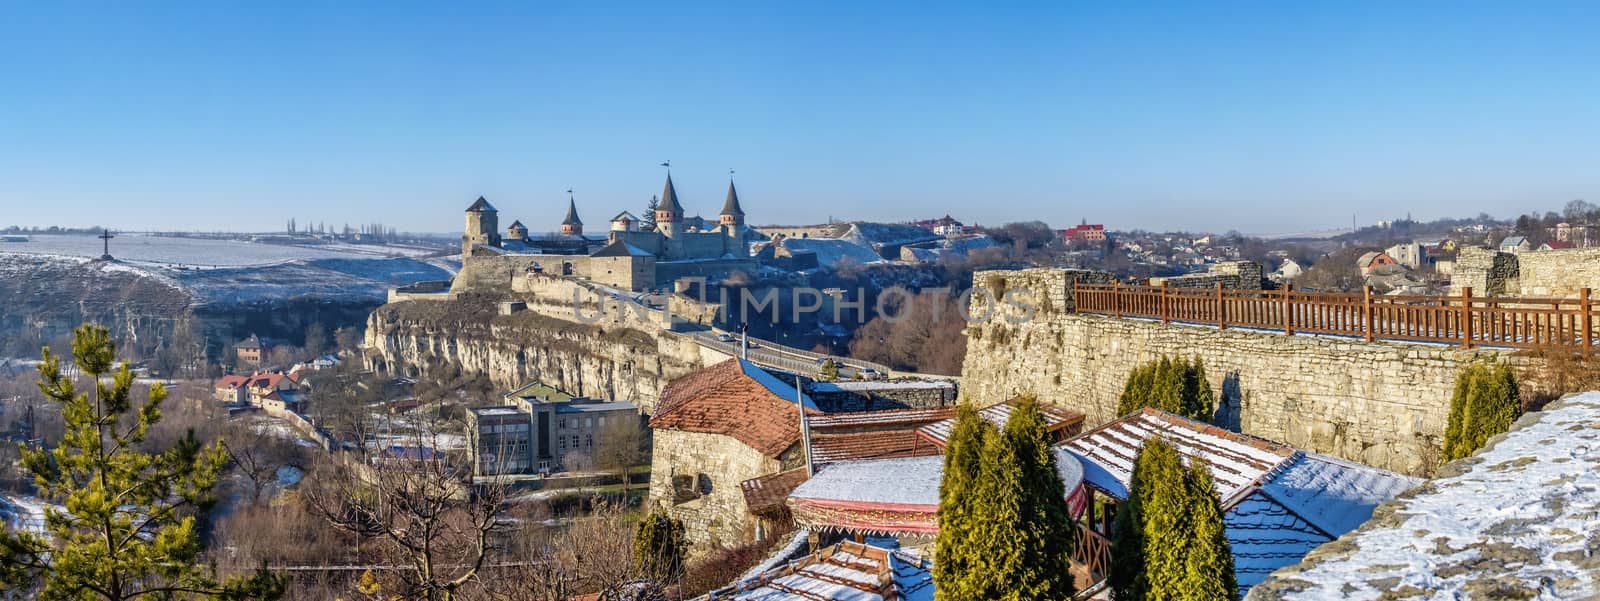 Kamianets-Podilskyi fortress on a sunny winter morning by Multipedia